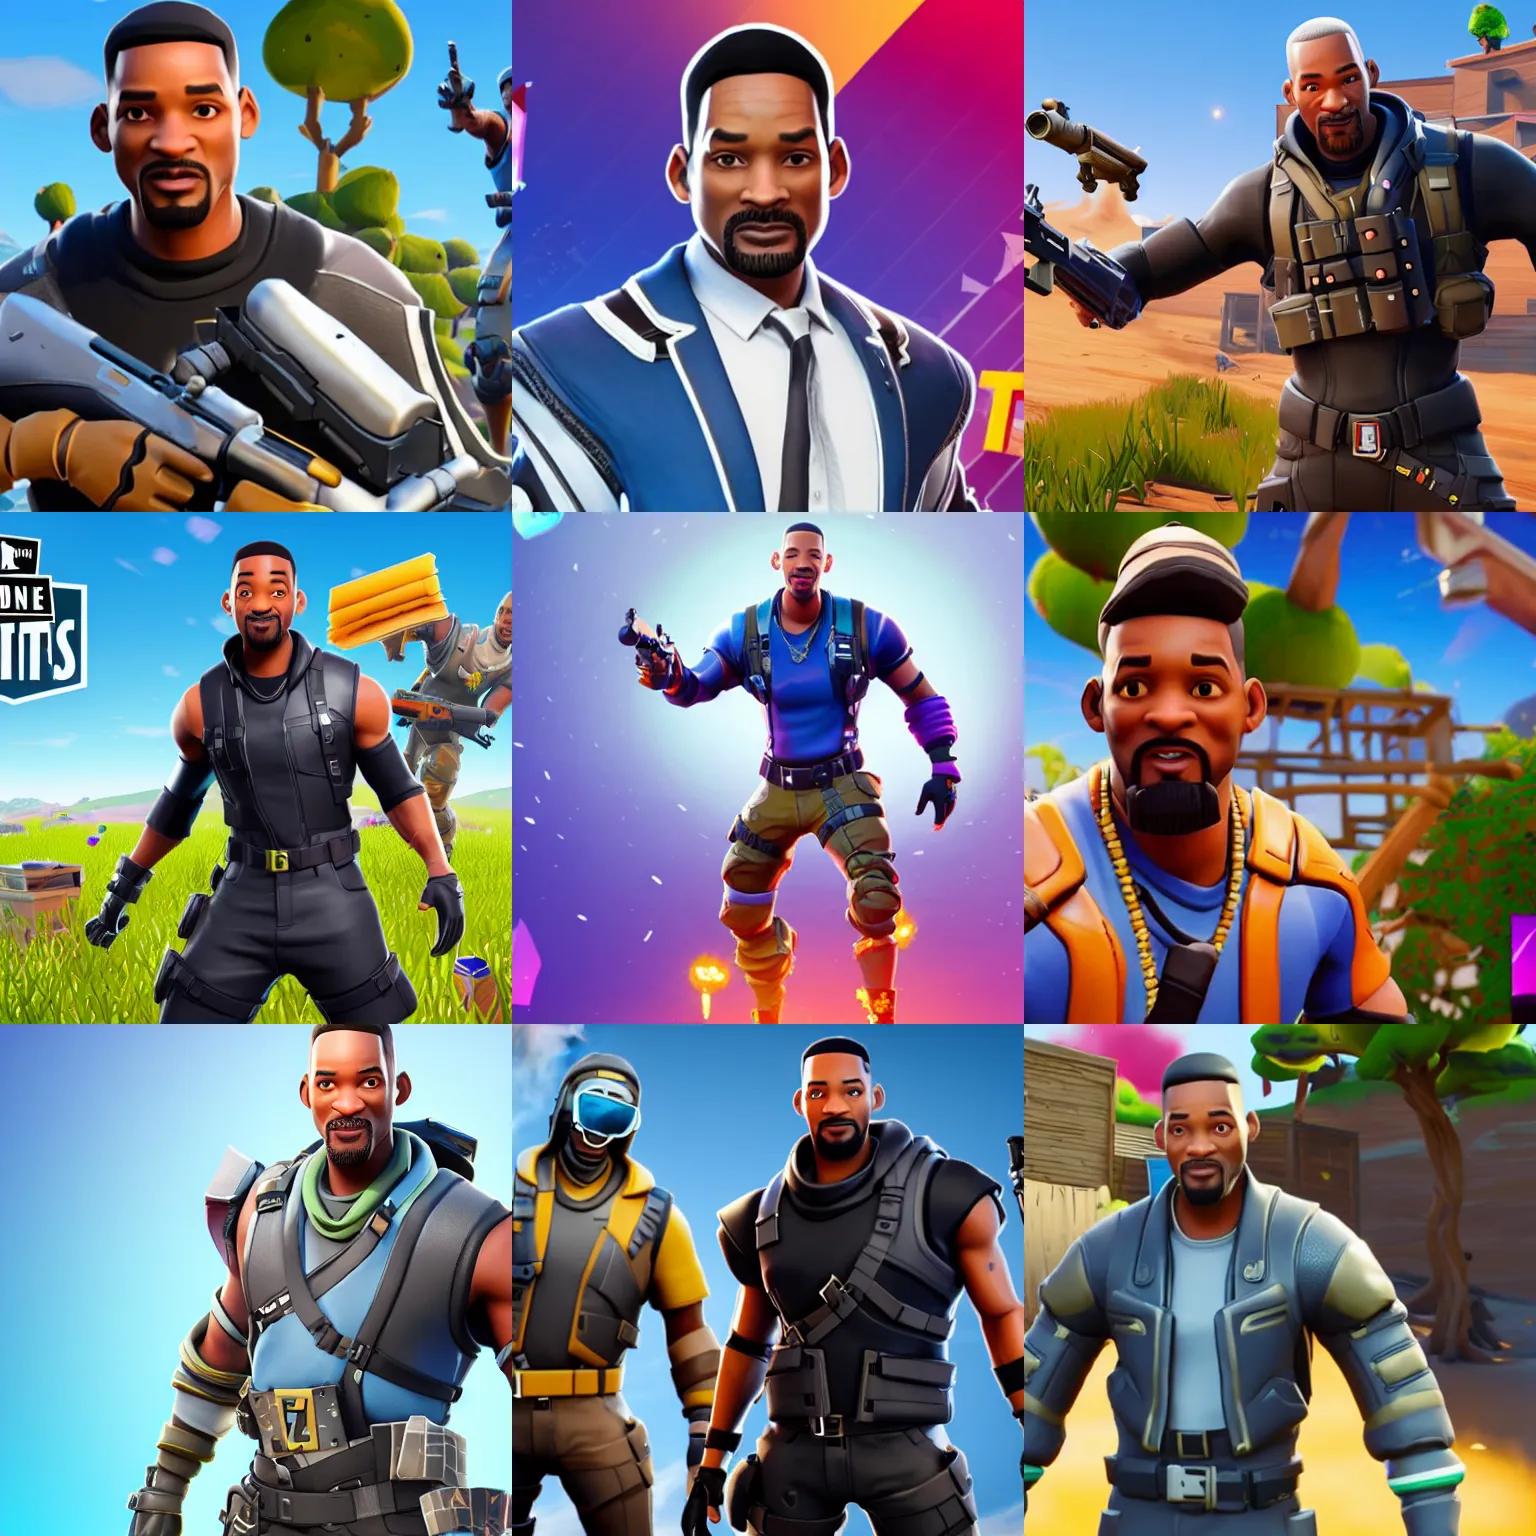 gameplay screenshot of will smith as a fortnite skin, | Stable Diffusion